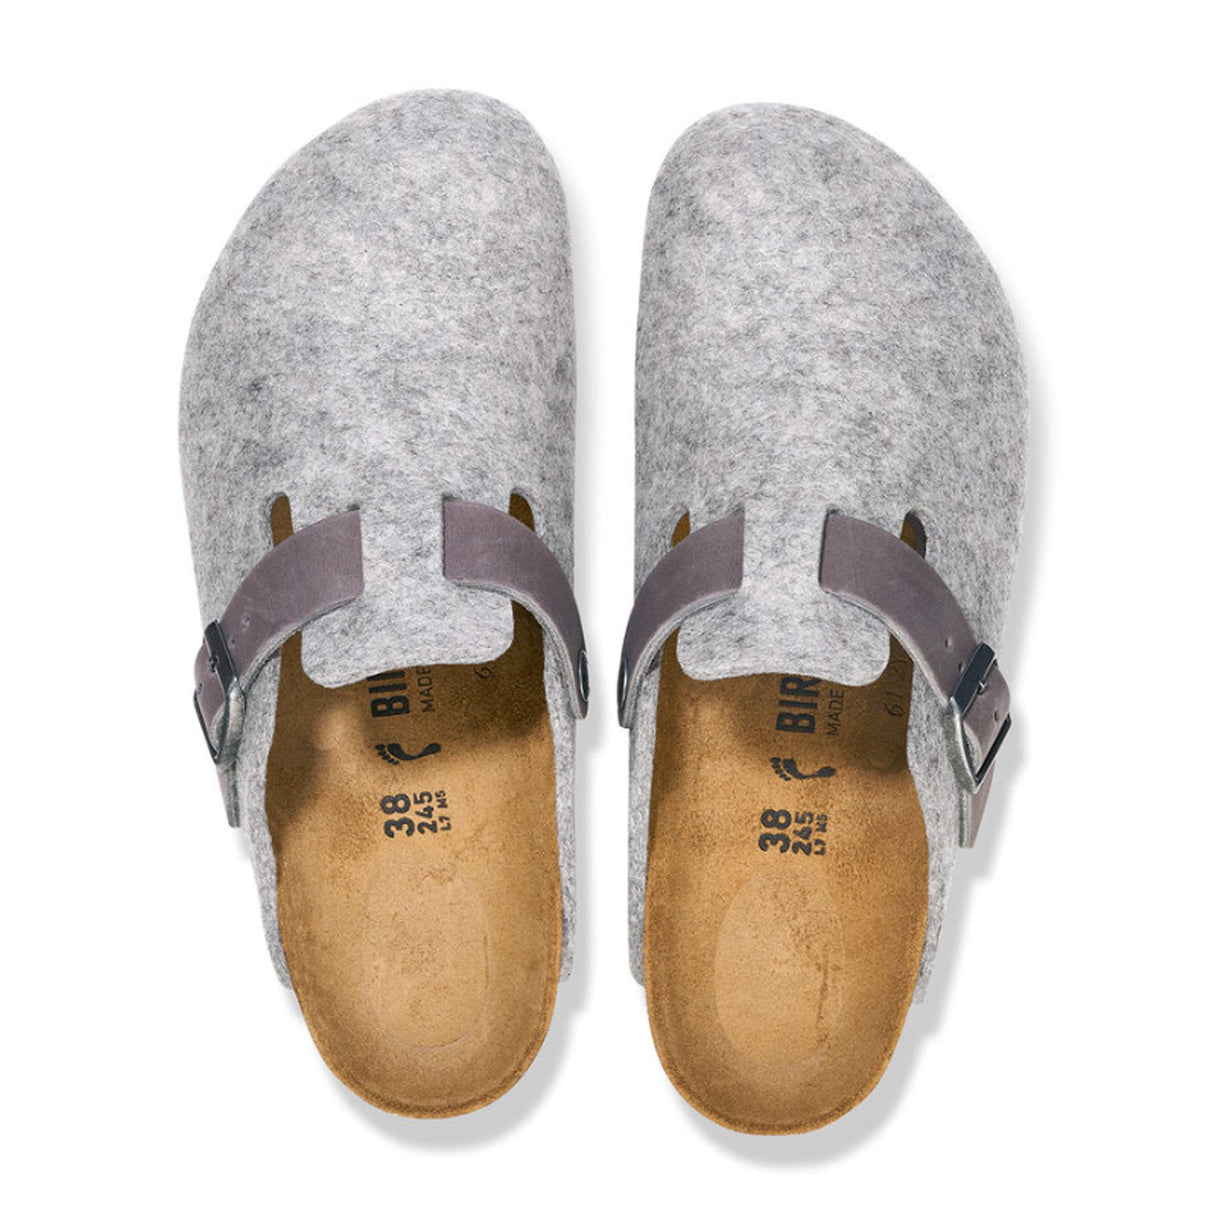 Birkenstock Boston Clog (Men) - Light Grey/Iron Wool/Oiled Leather Dress-Casual - Clogs & Mules - The Heel Shoe Fitters